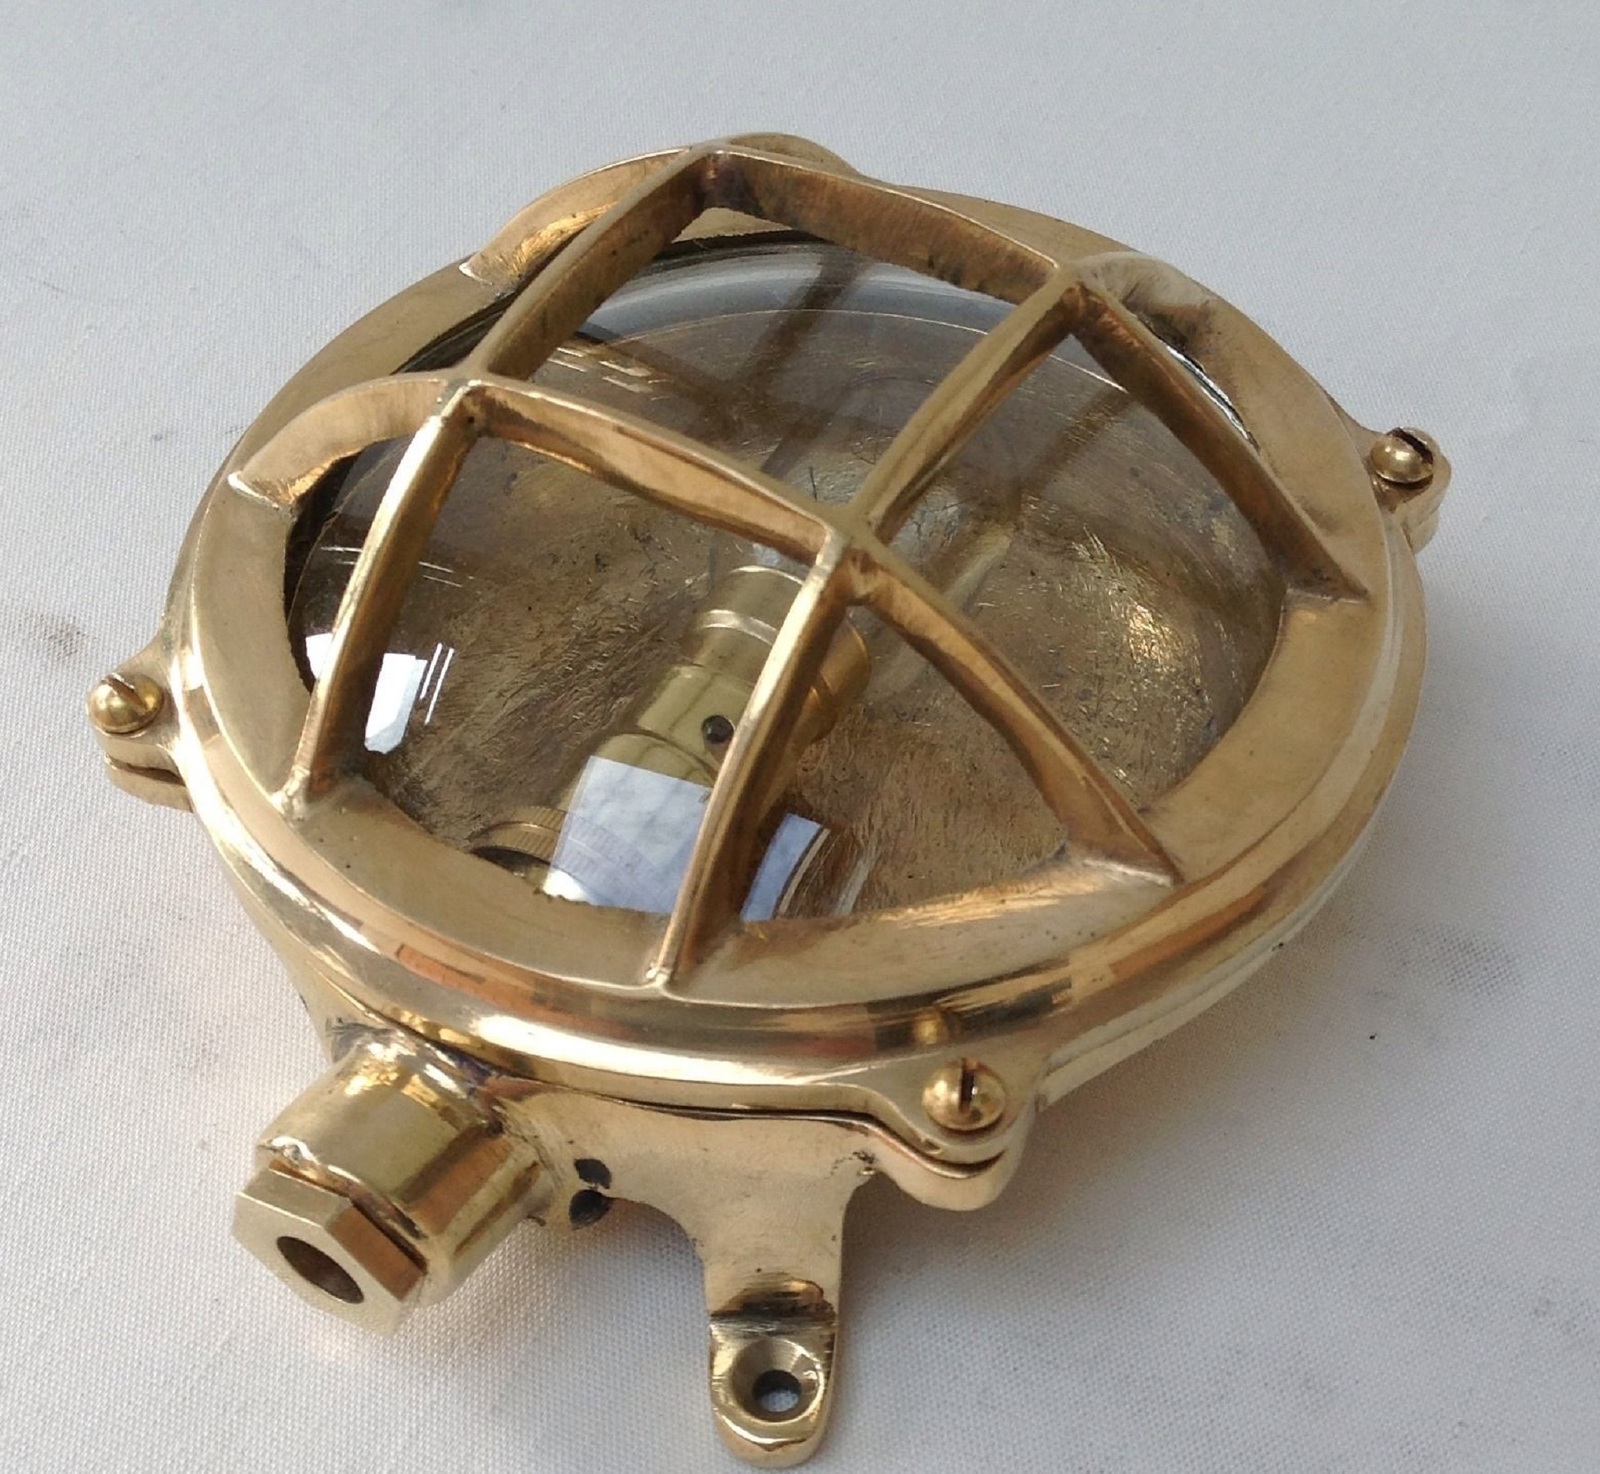 Maritime Theme Small Solid Brass Bulkhead Turtle Style Antique Wall Deck Light